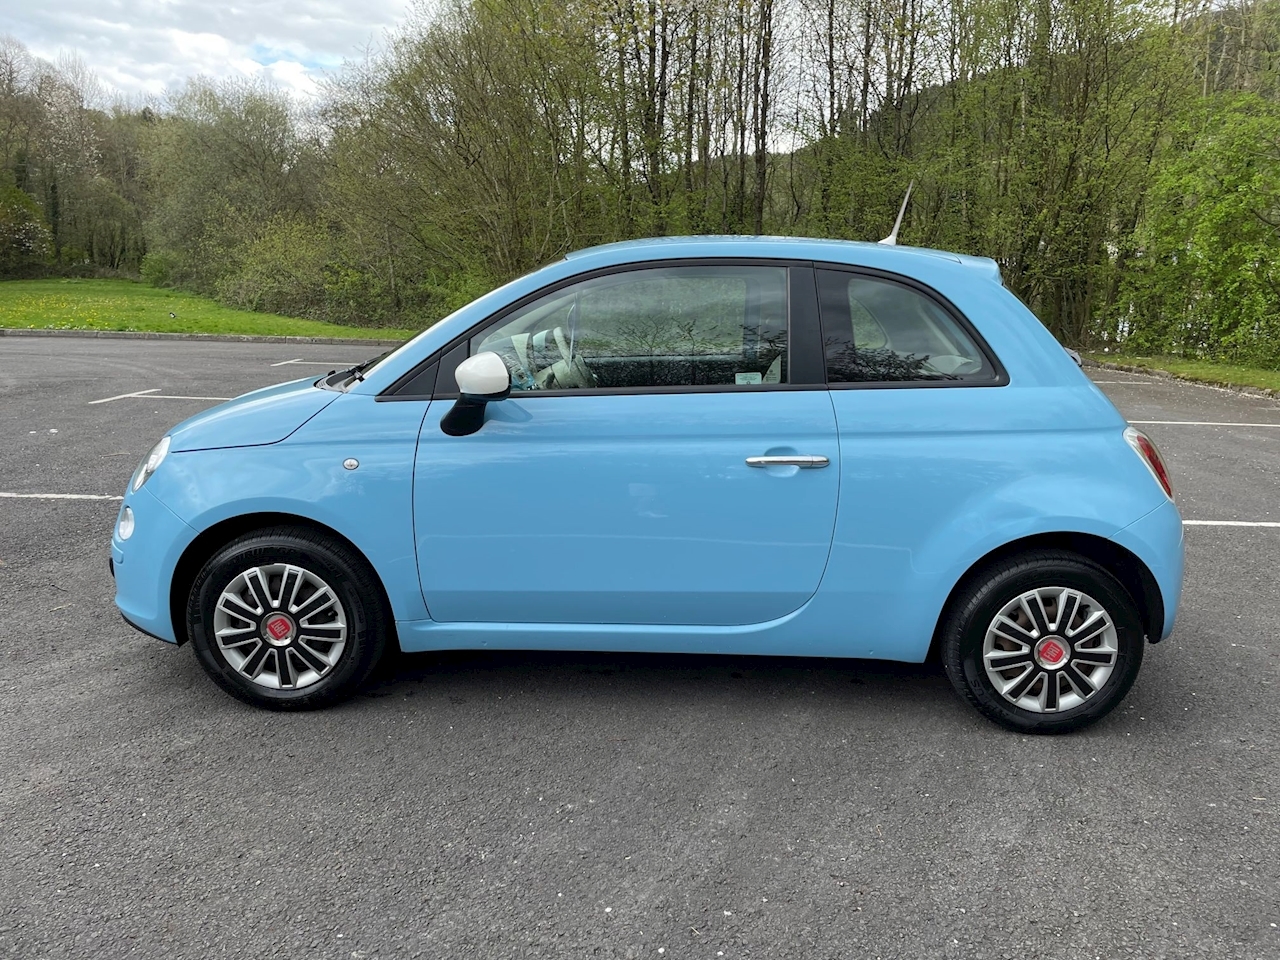 1.2 Colour Therapy Hatchback 3dr Petrol Manual (113 g/km, 69 bhp)